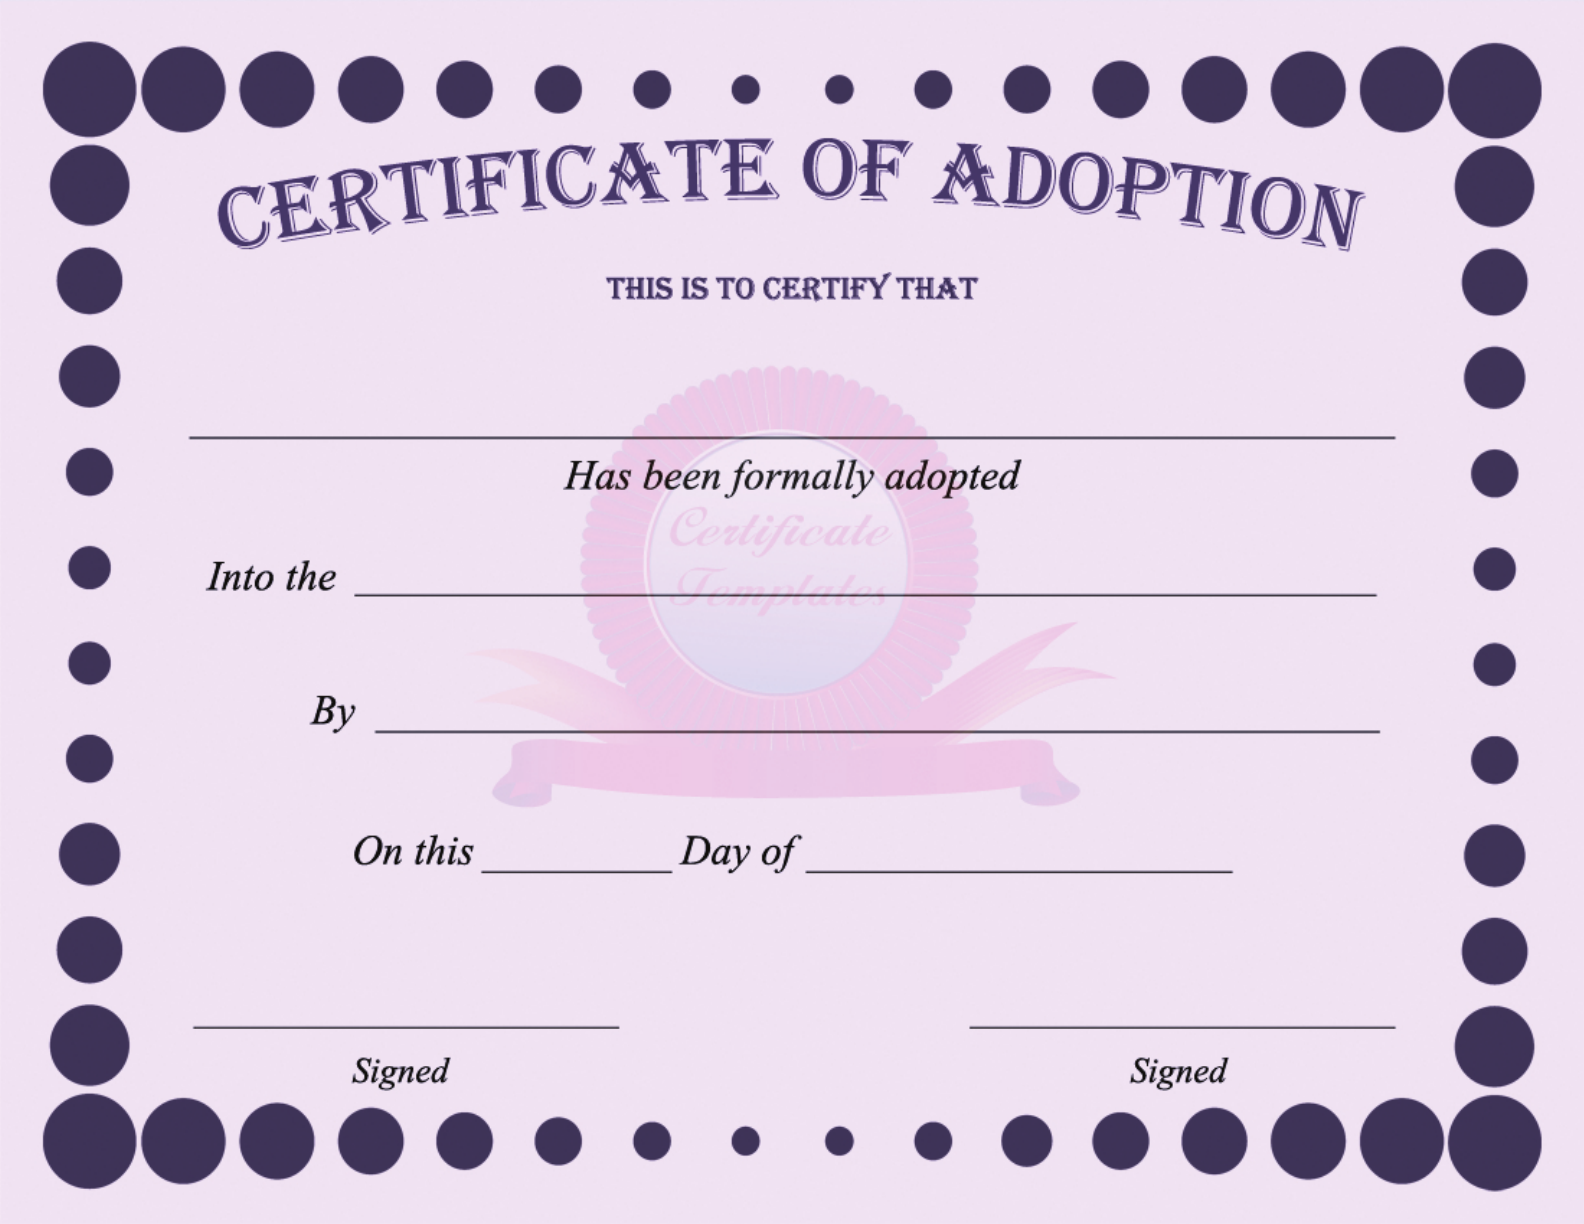 Free Adoption Certificate - PDF  22KB  22 Page(s) For Adoption Certificate Template